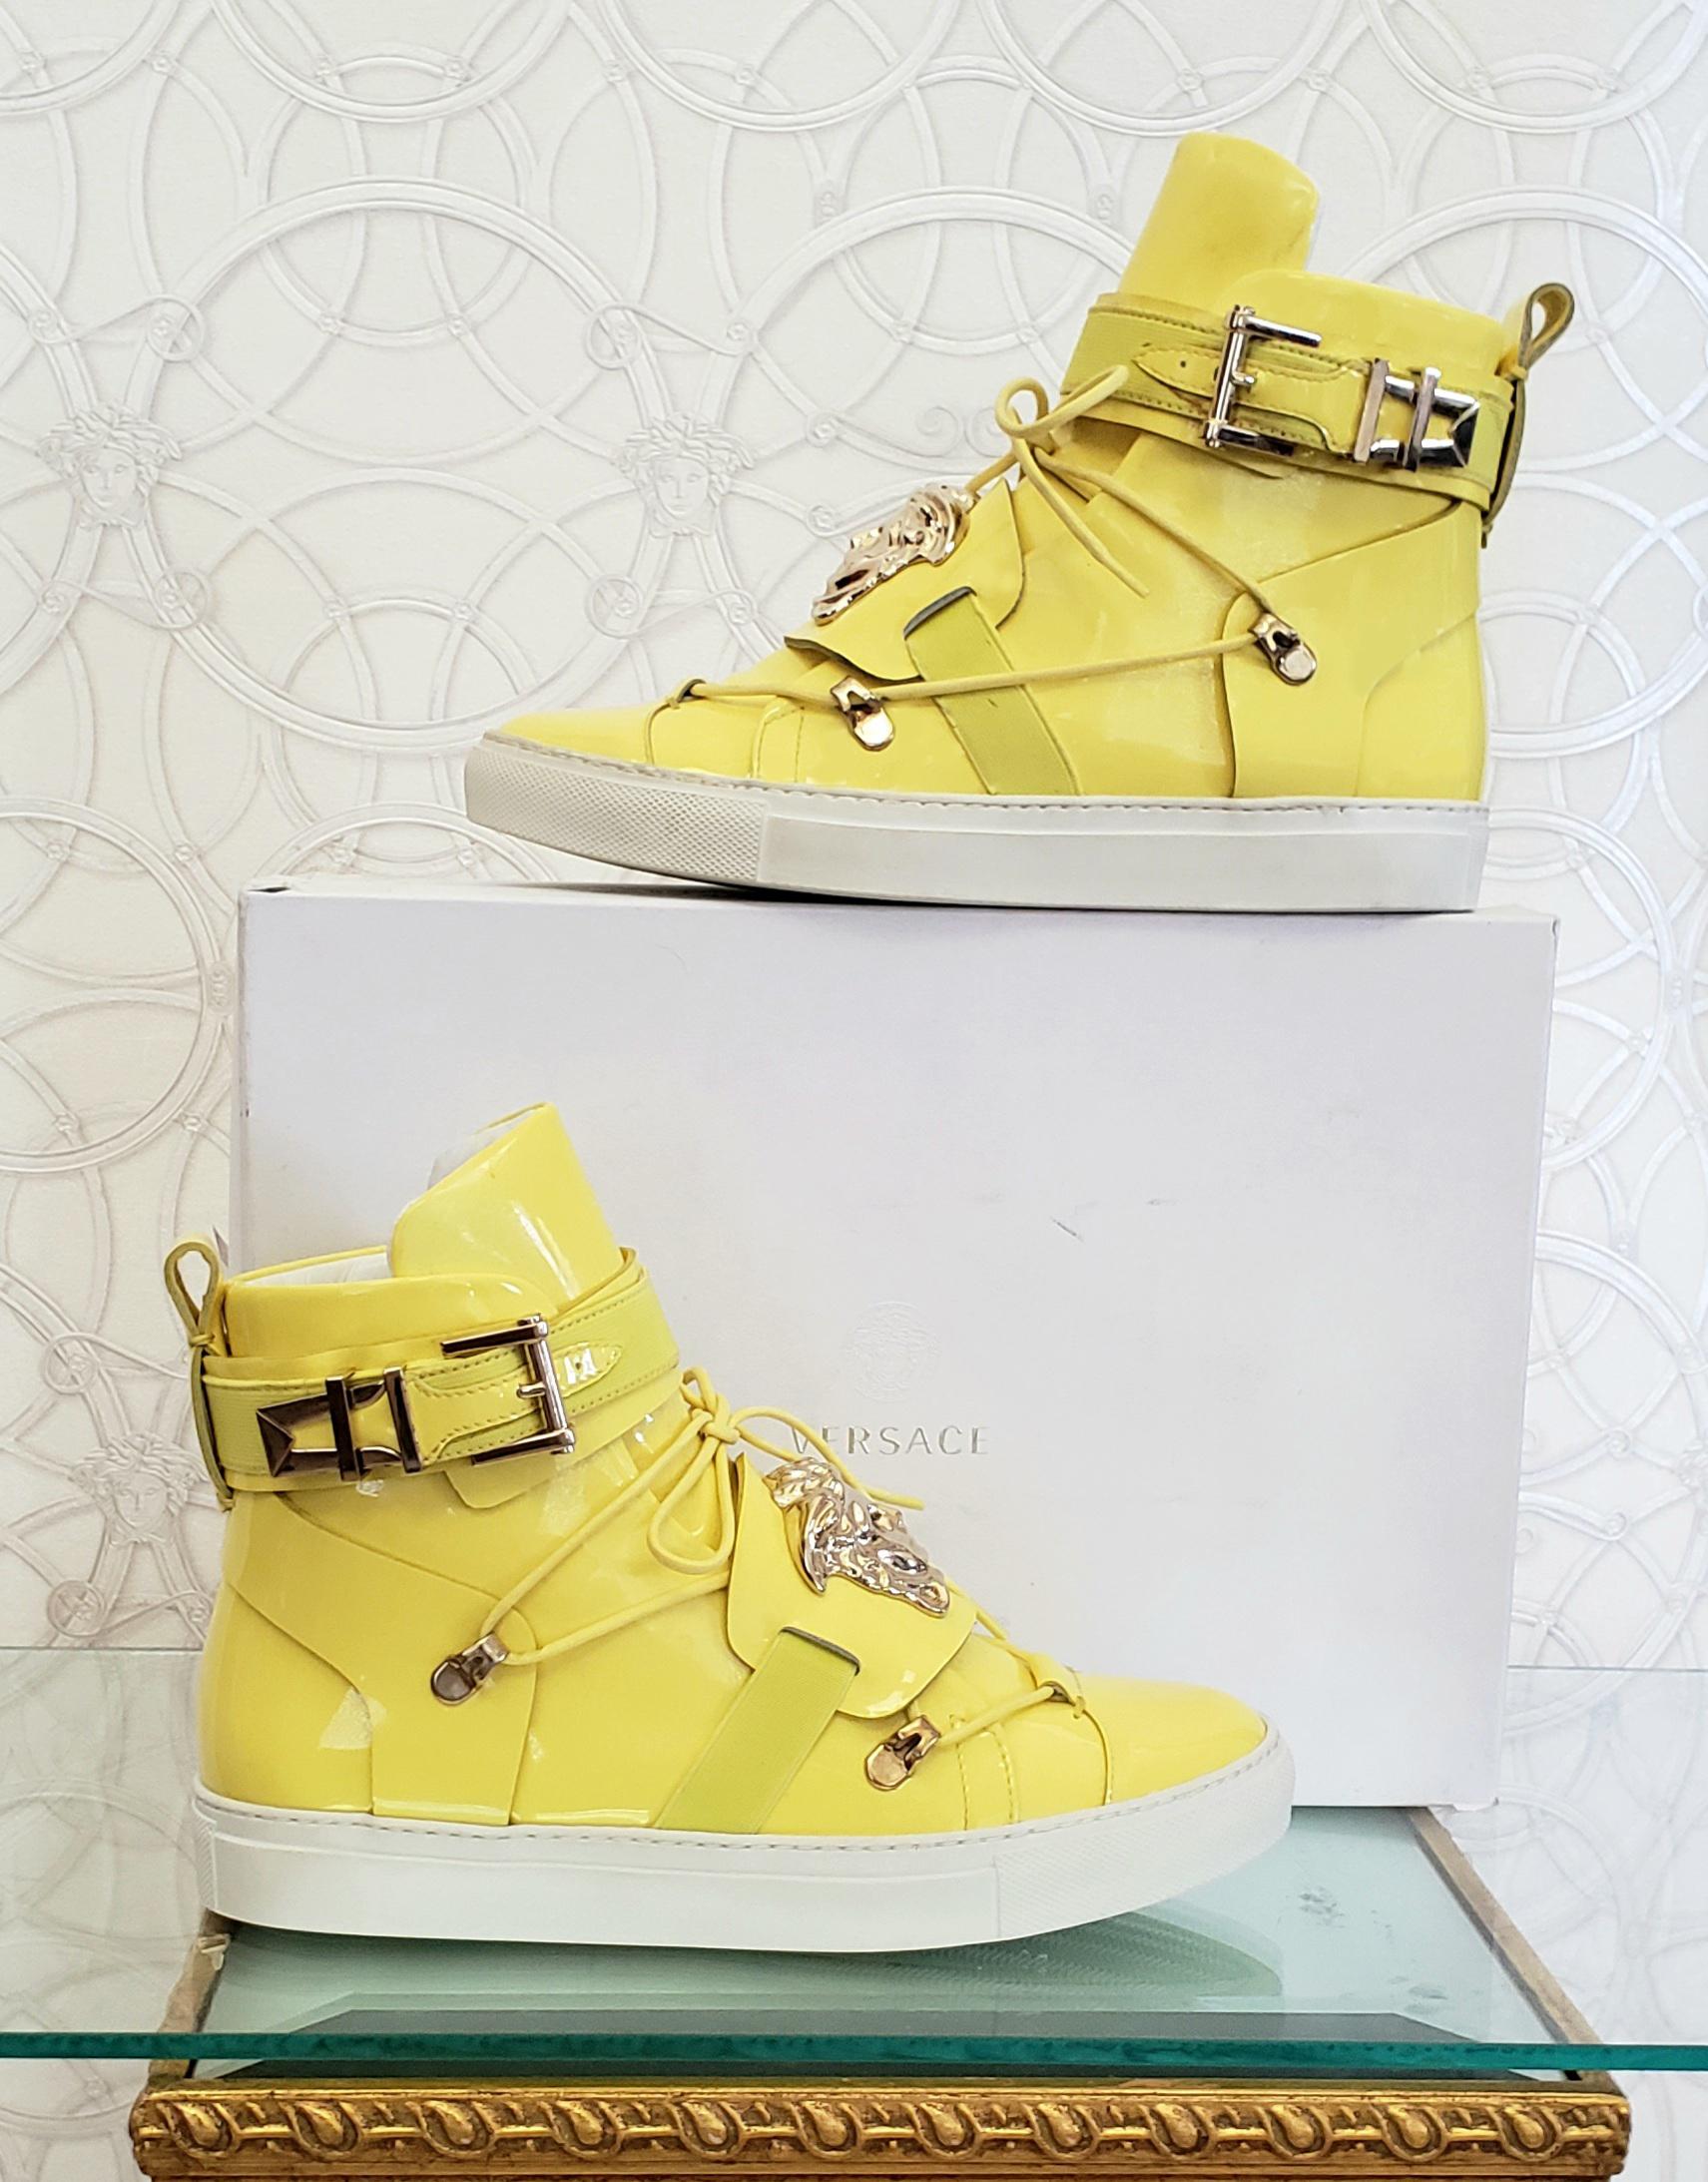 Yellow NEW VERSACE YELLOW PATENT LEATHER SNEAKERS w/ GOLD 3D MEDUSA HEAD 36 - 6 For Sale